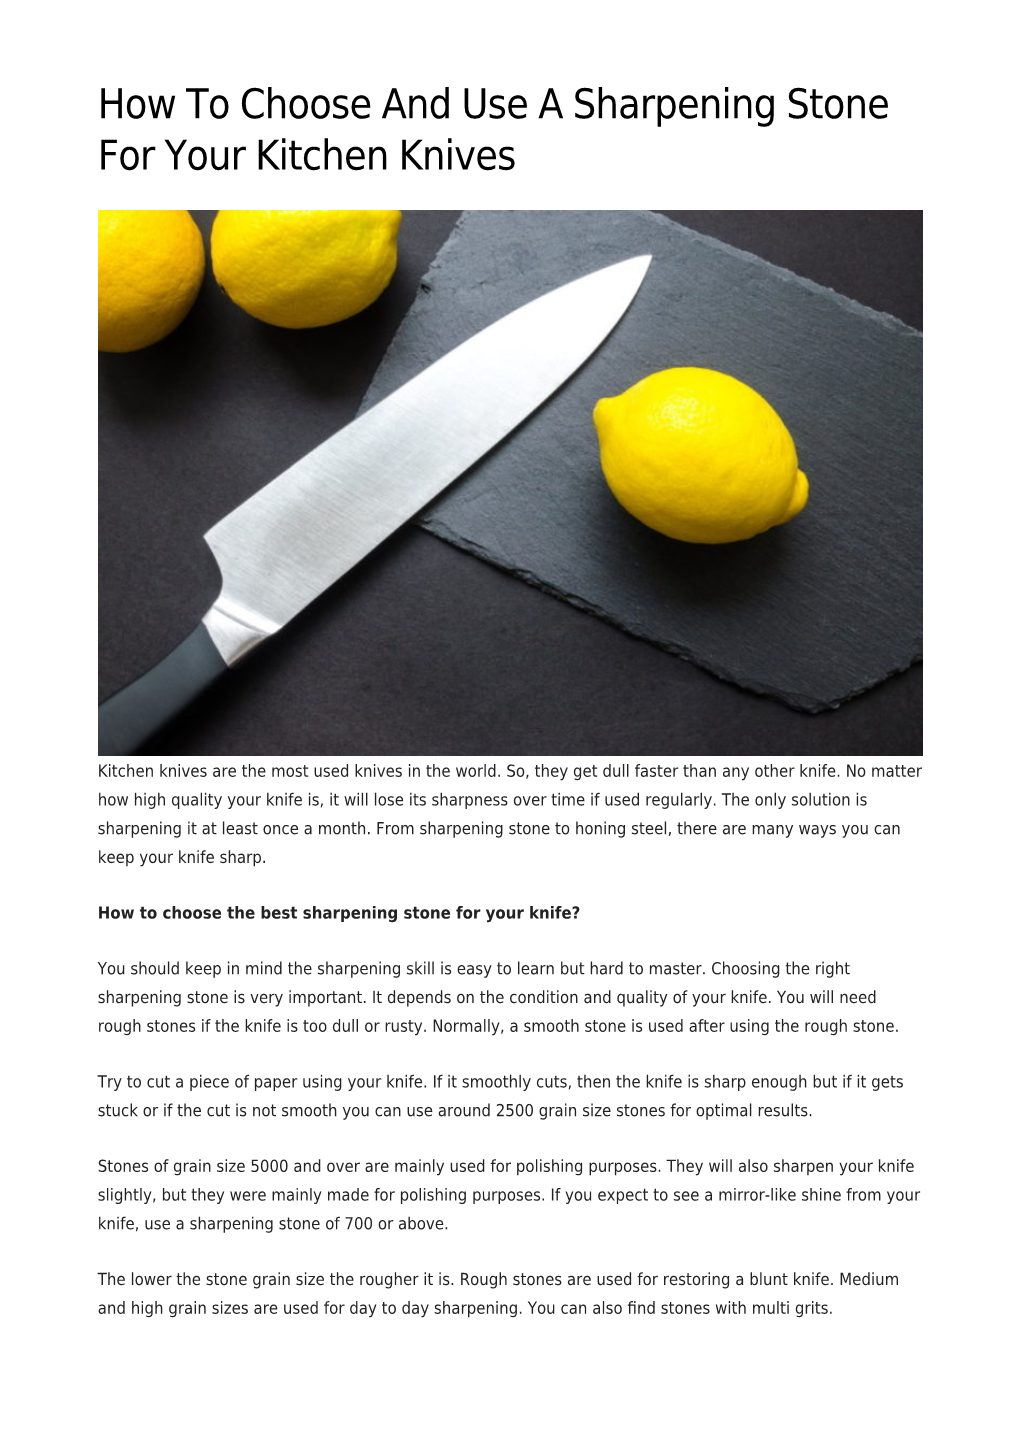 How to Choose and Use a Sharpening Stone for Your Kitchen Knives